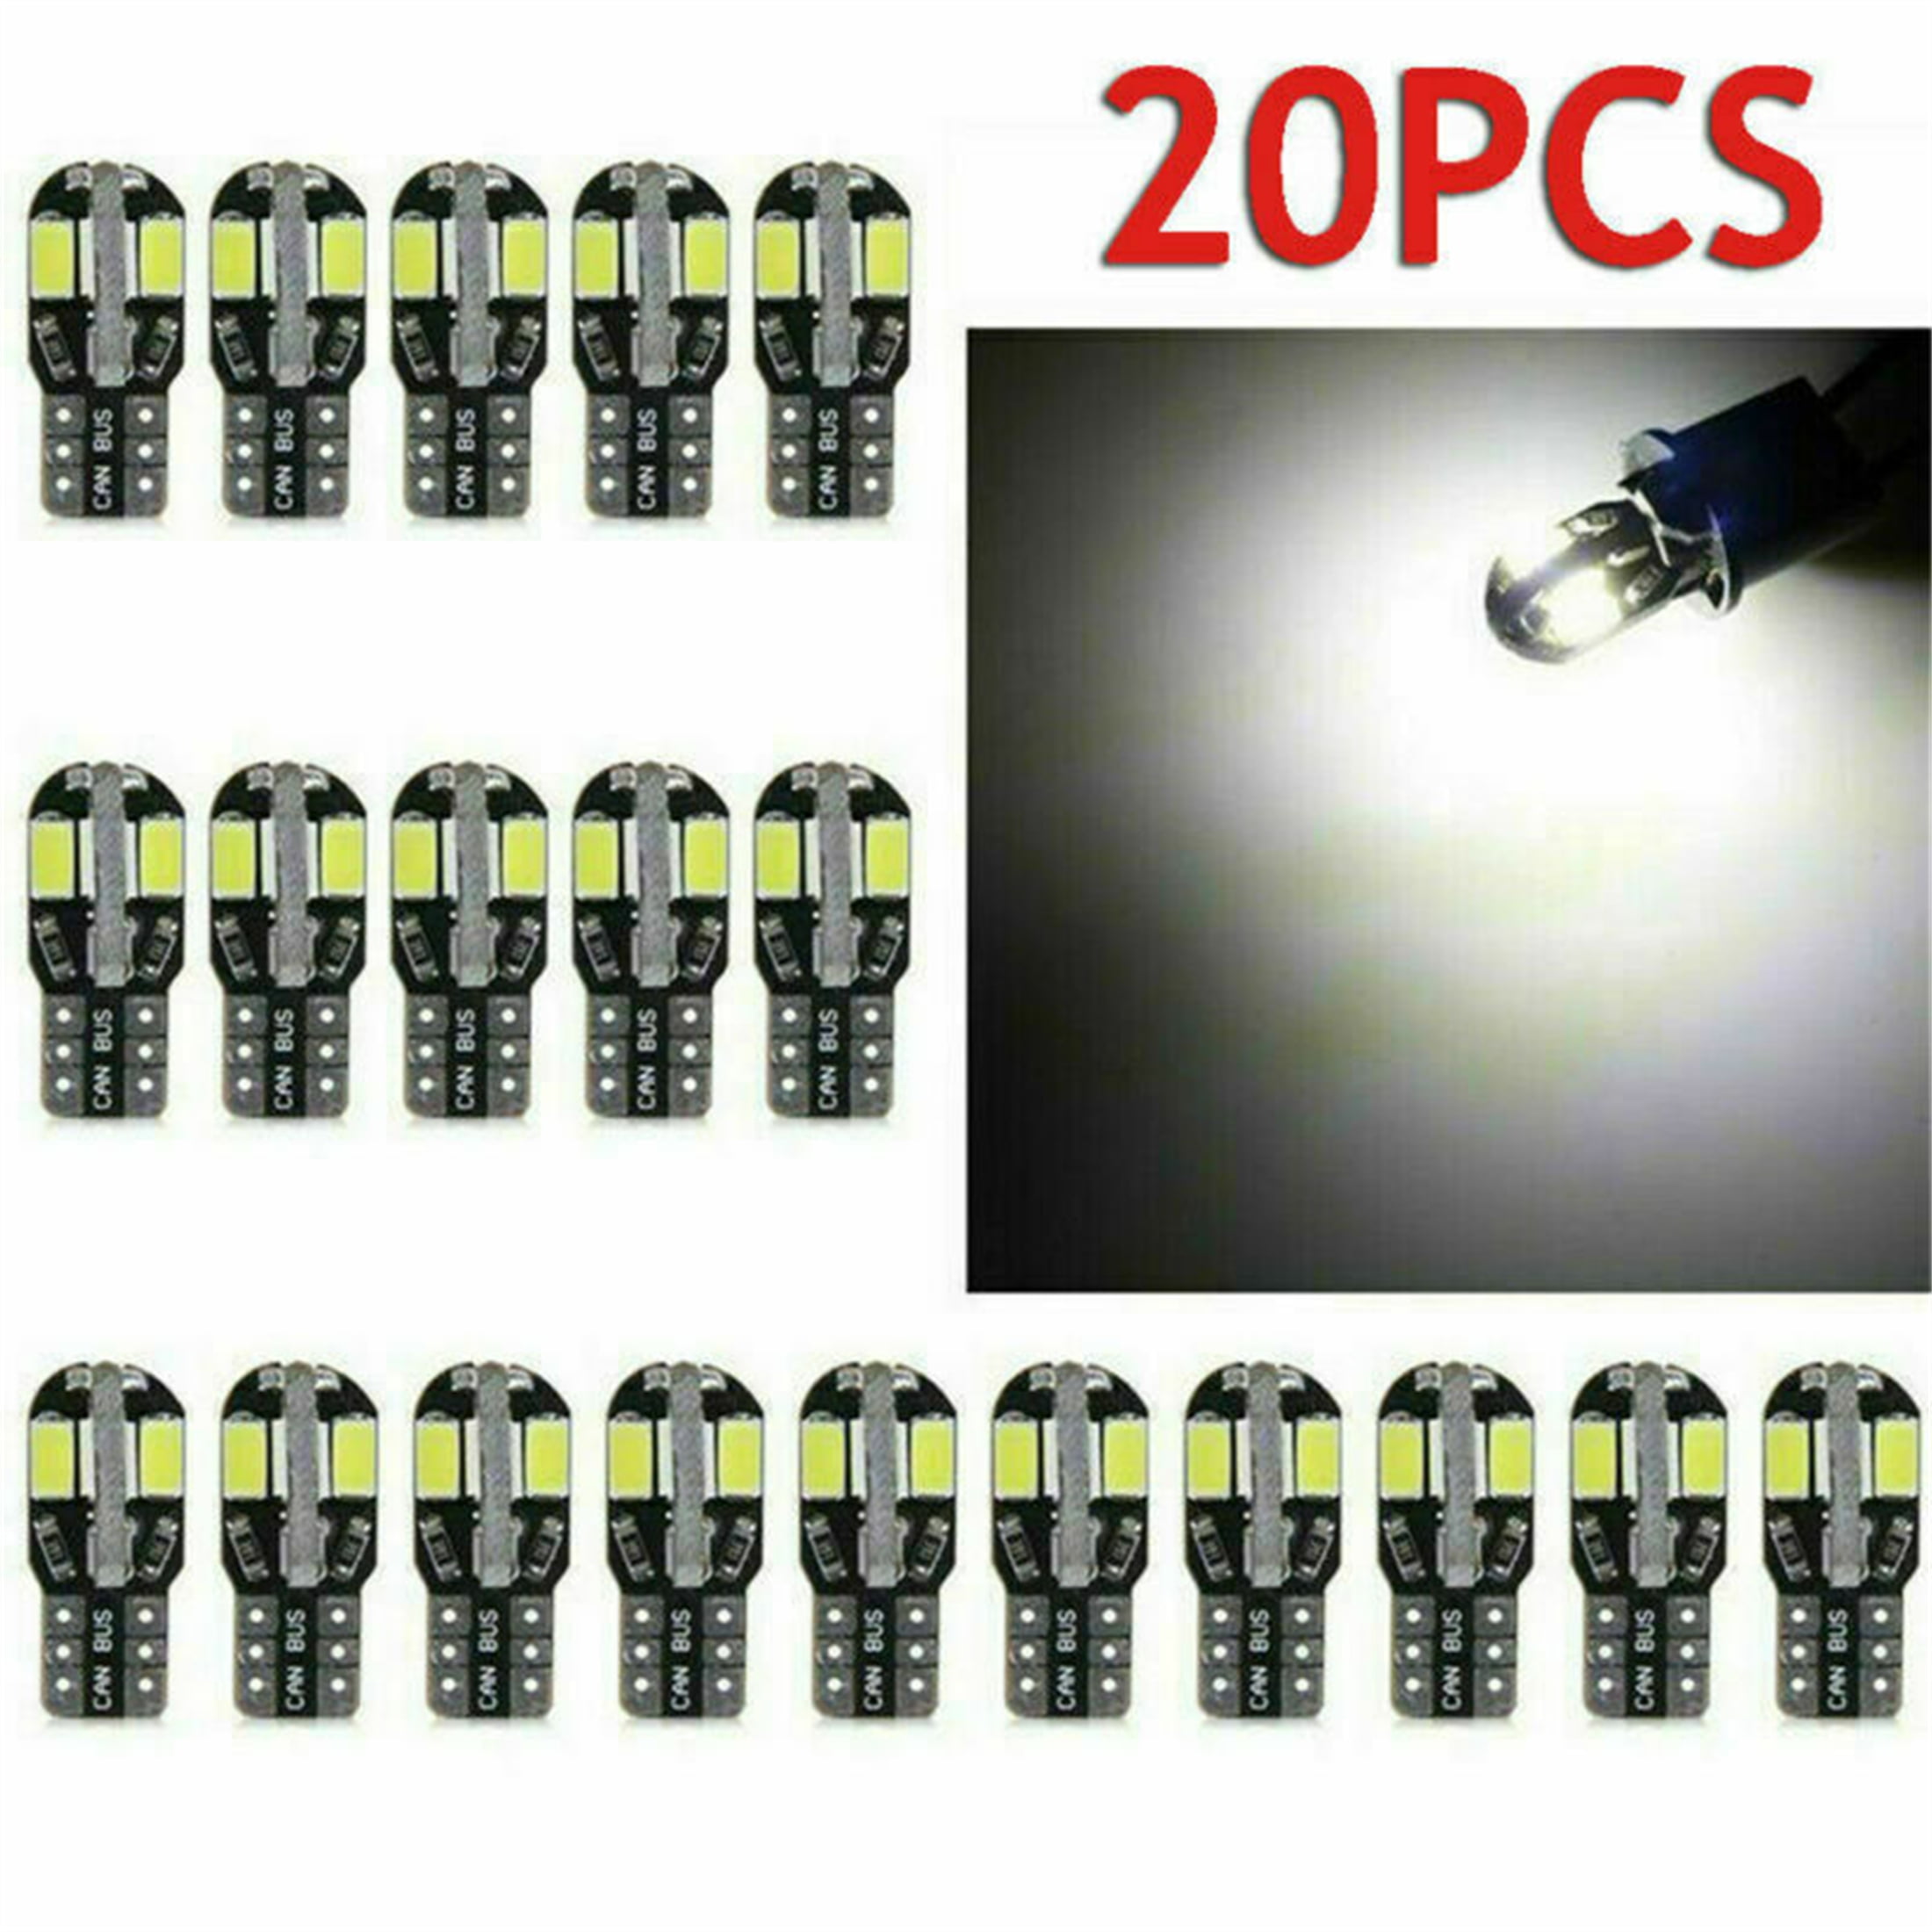 20x Canbus T10 194 168 W5W 5730 8 LED SMD White Car Side Wedge Light Lamp HOT